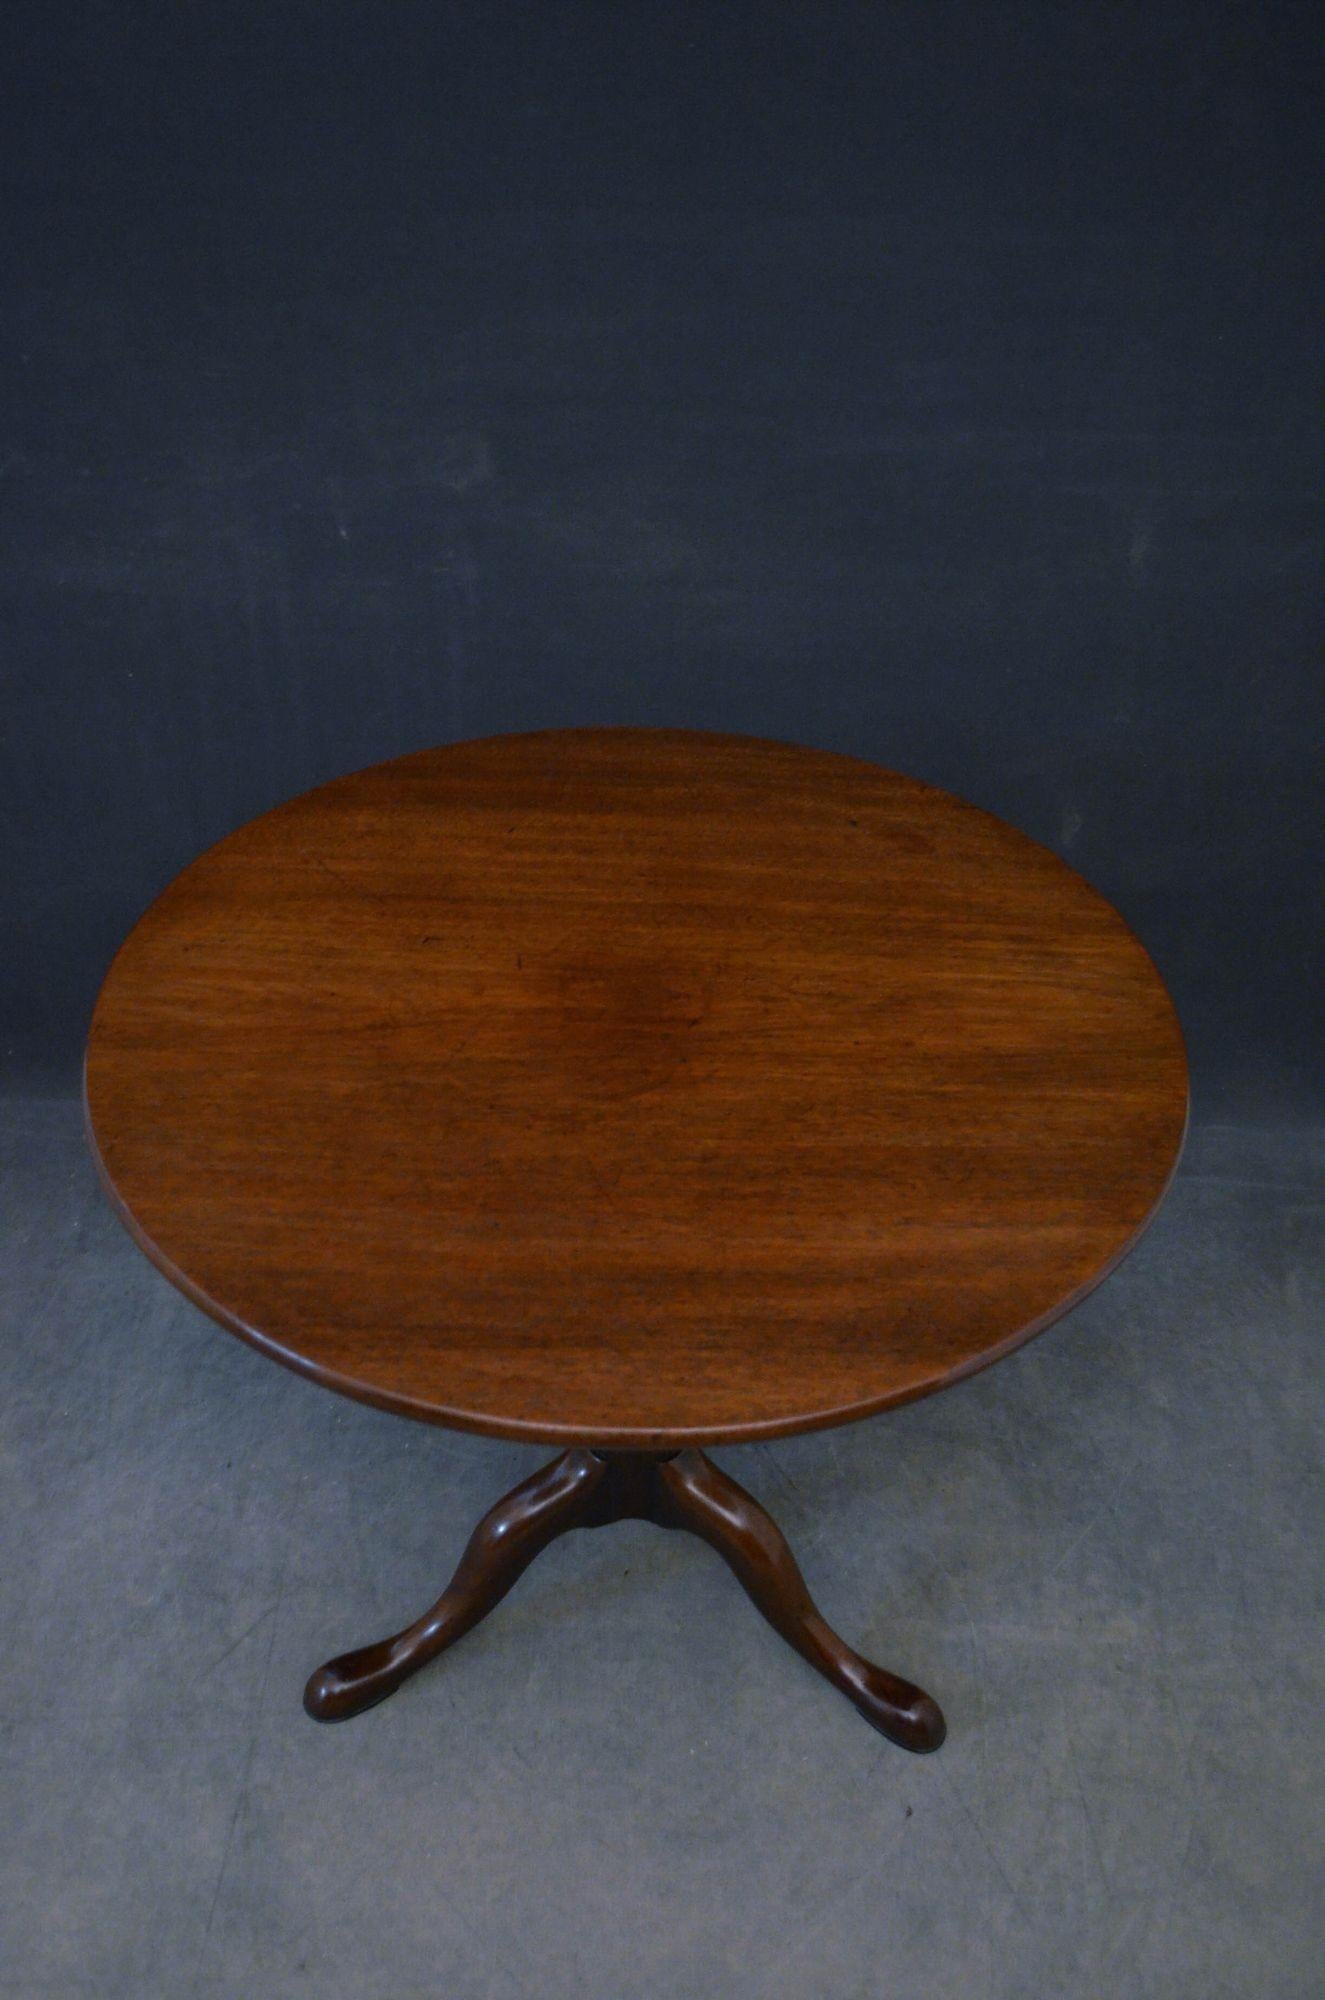 Georgian Mahogany Tilt Top Table In Good Condition For Sale In Whaley Bridge, GB